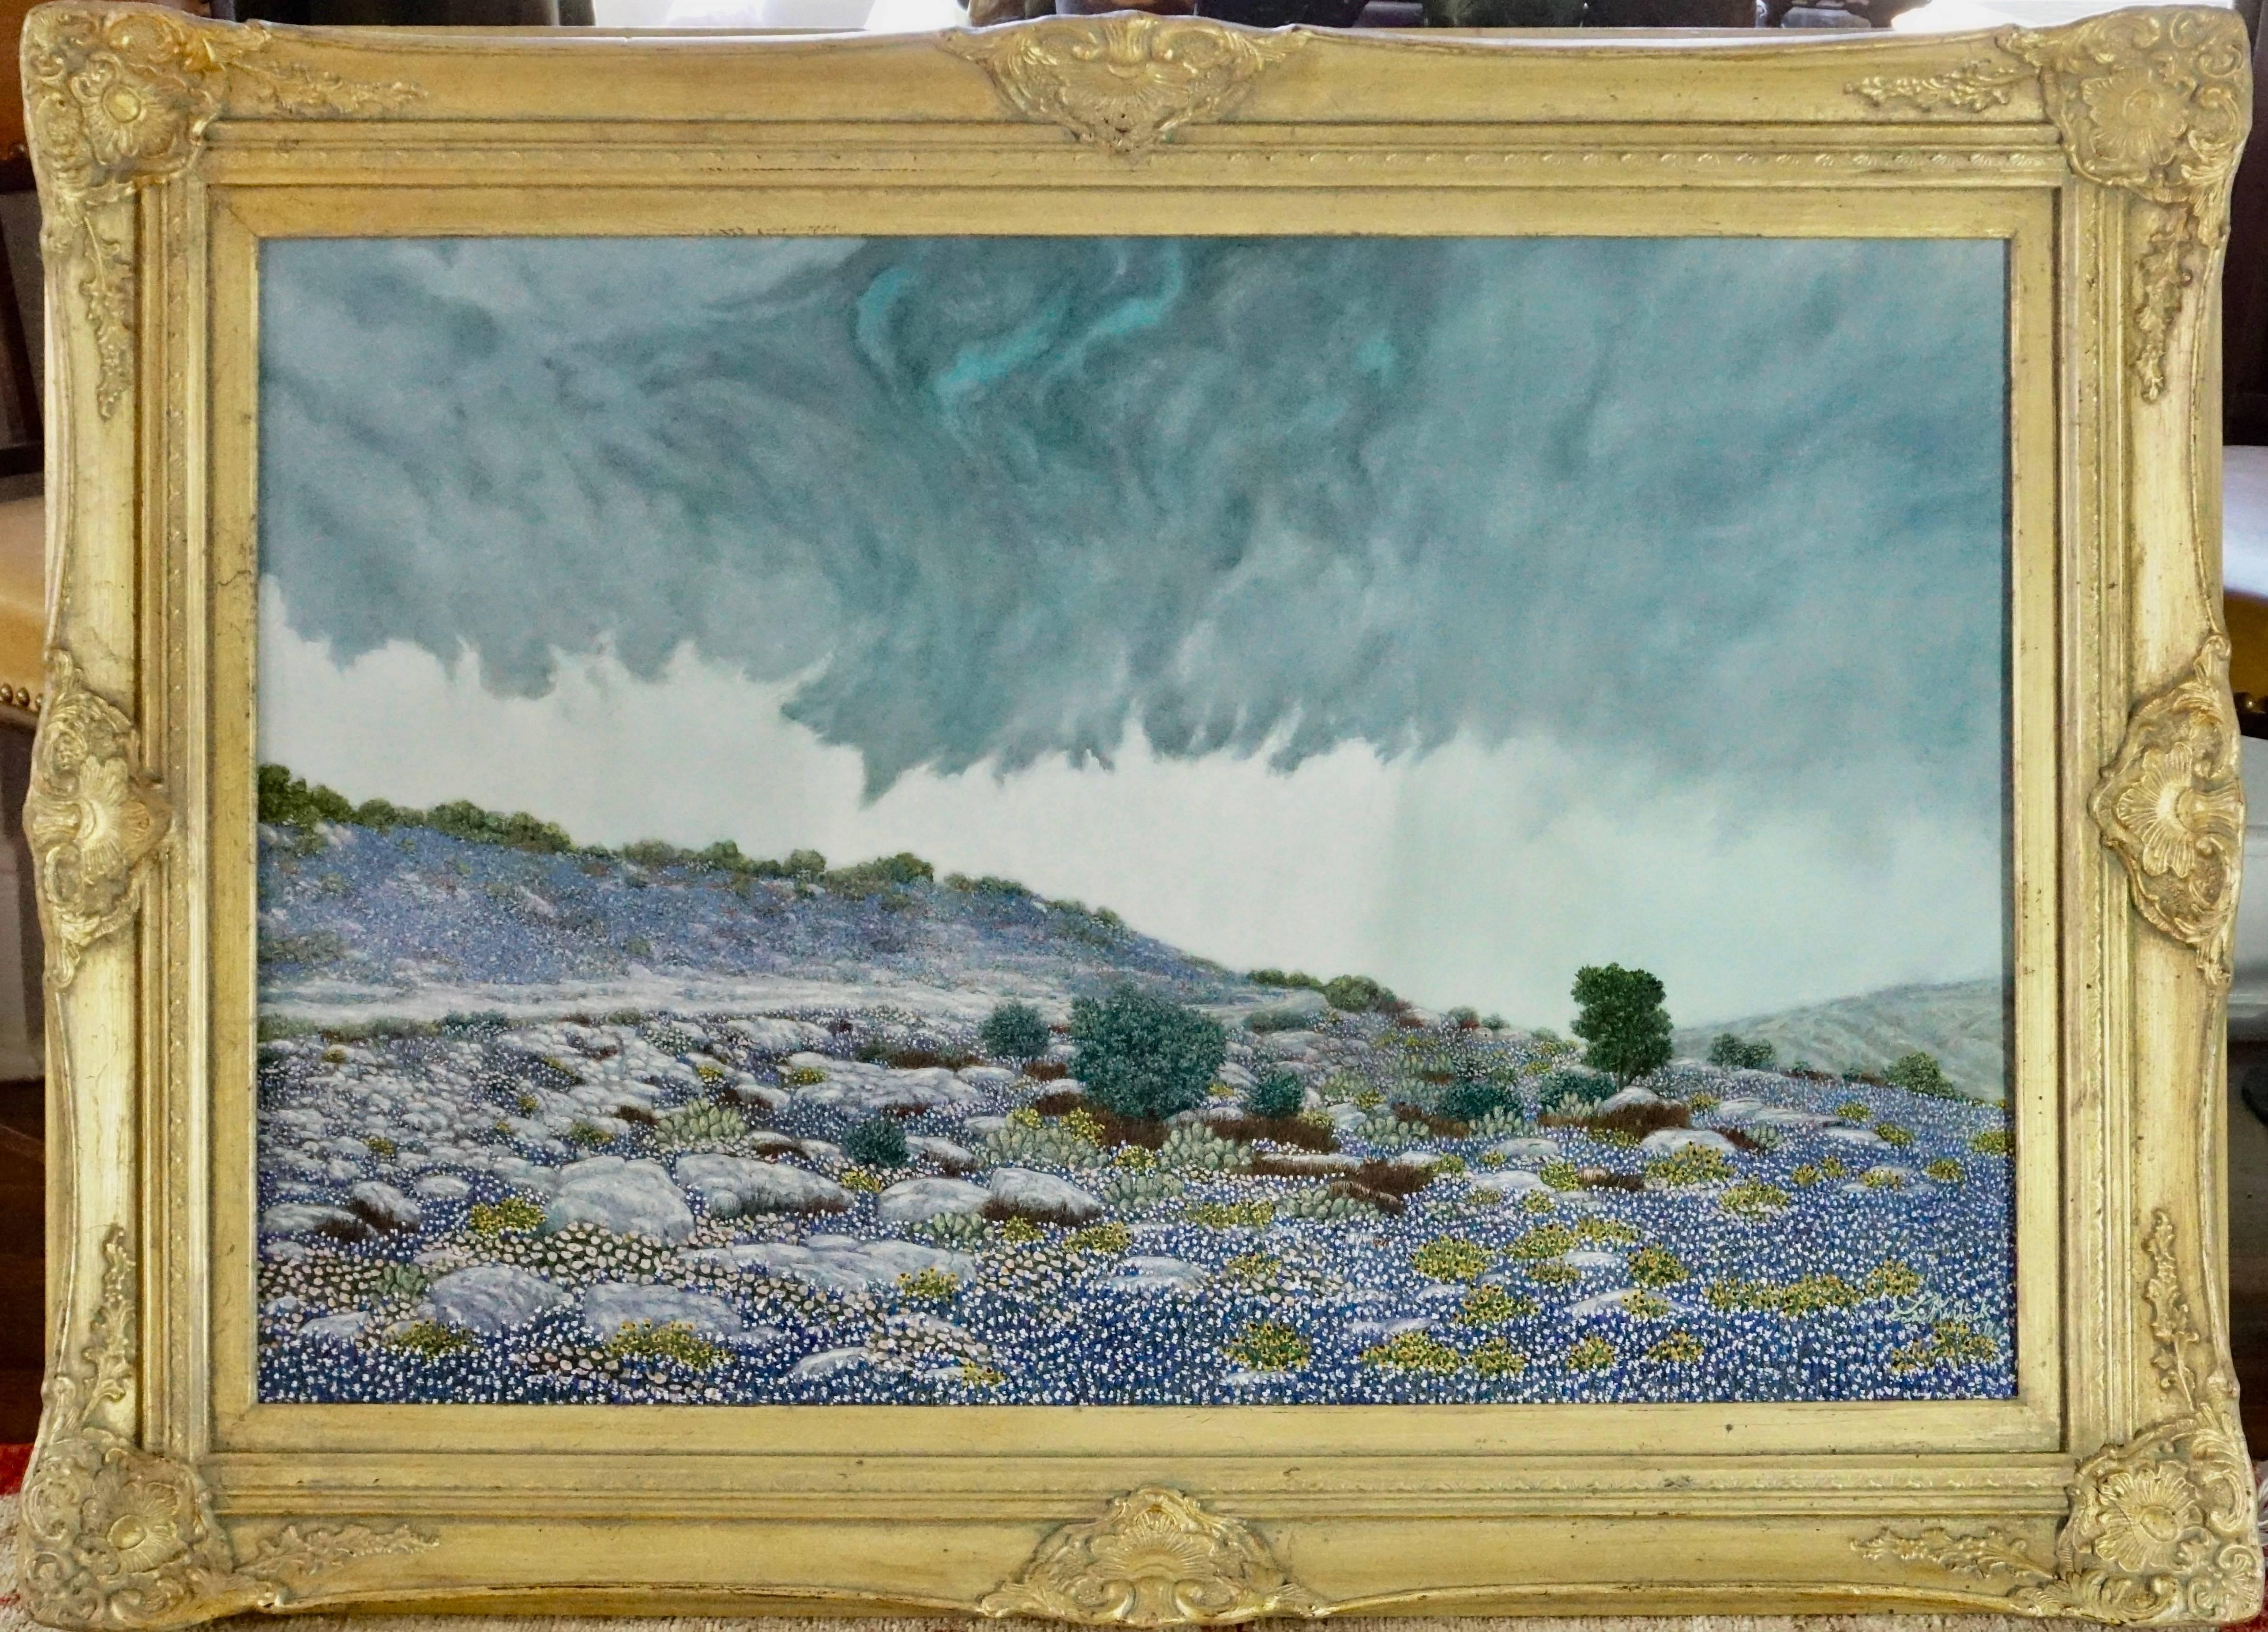 Hand-Painted Daniel Kendrick Texas Bluebonnets “Take Cover” Oil Painting